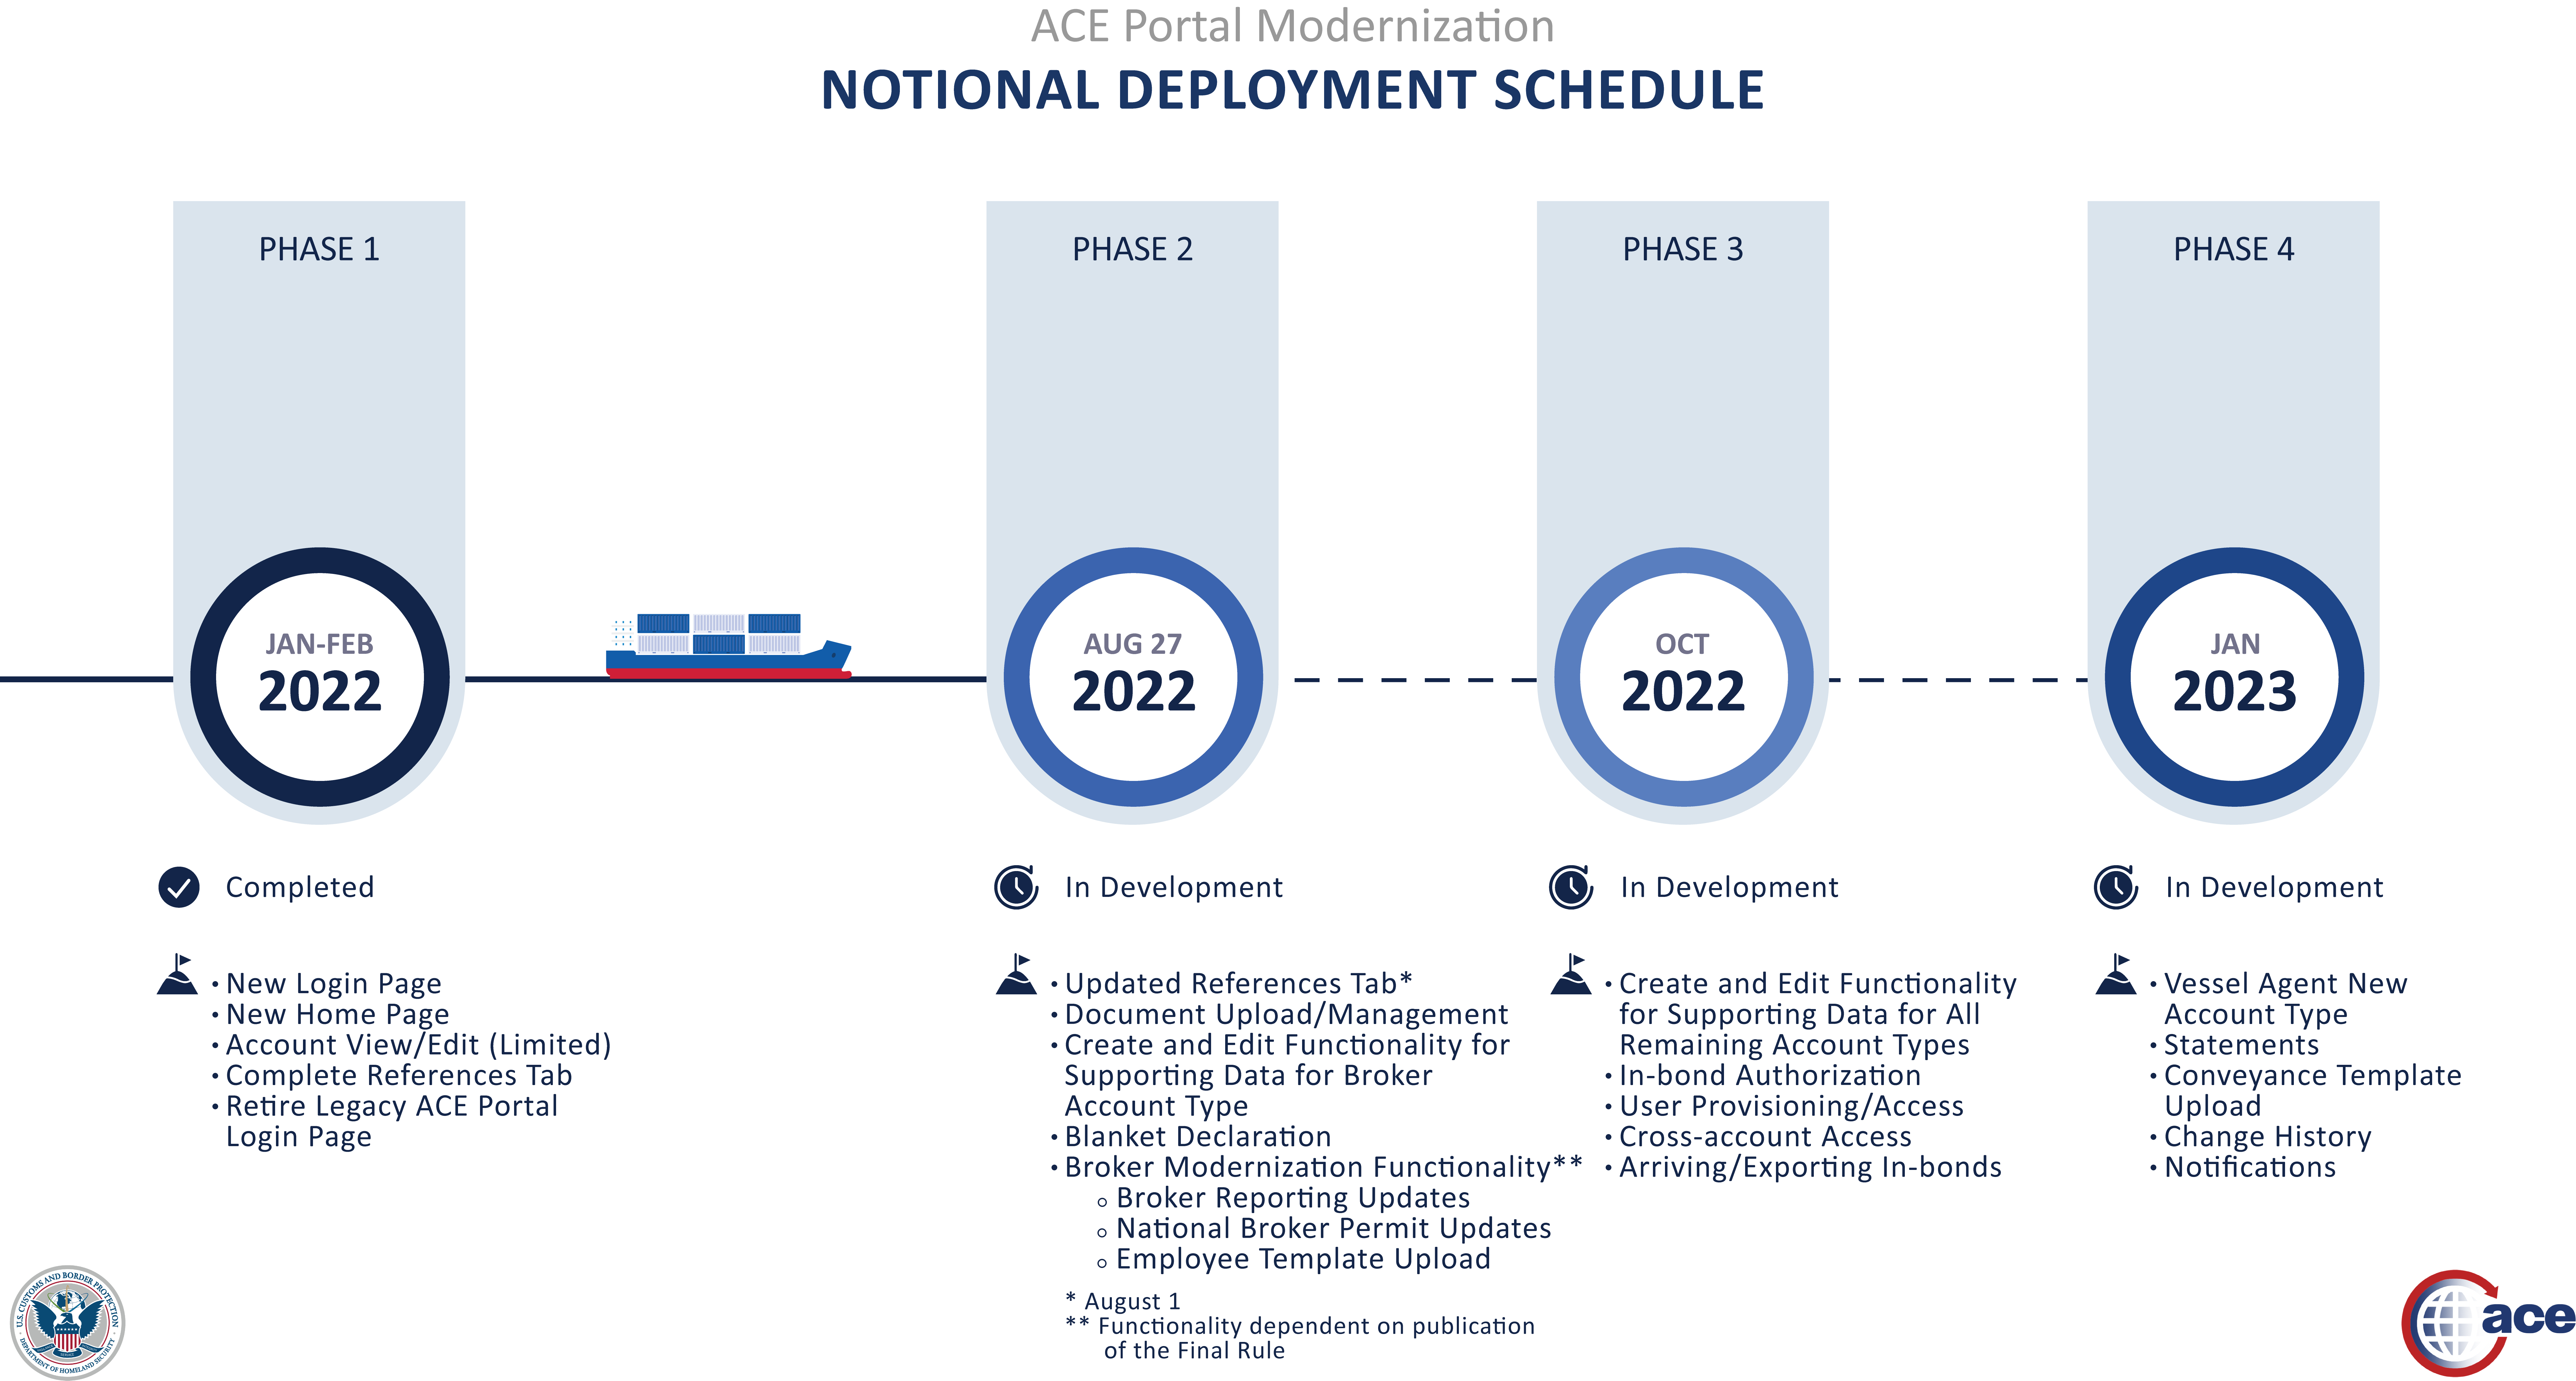 ACE Portal Modernization Notional Schedule phases as depicted by four columns; shipping barge passing between columns of phases that are in progress. Phase 1: Jan-Feb 2022. Phase 2: August 27, 2022. Phase 3: October 2022. Phase 4: January 2023.